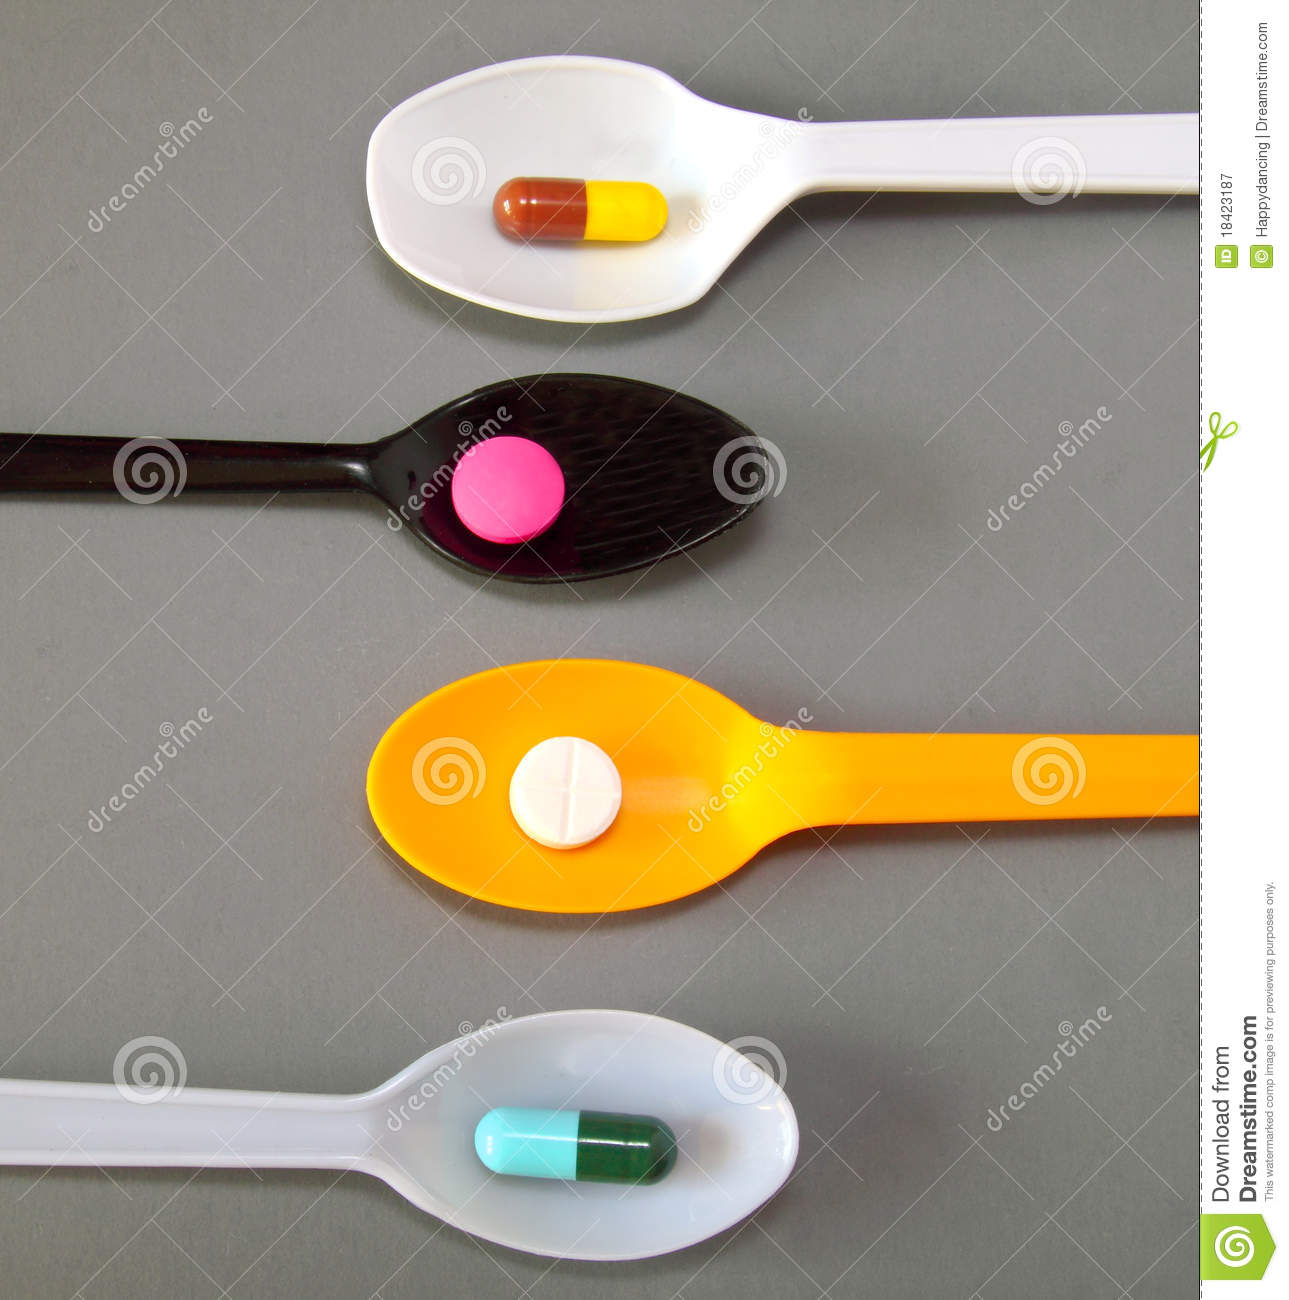 Four Spoons With Different Pills Royalty Free Stock Photography